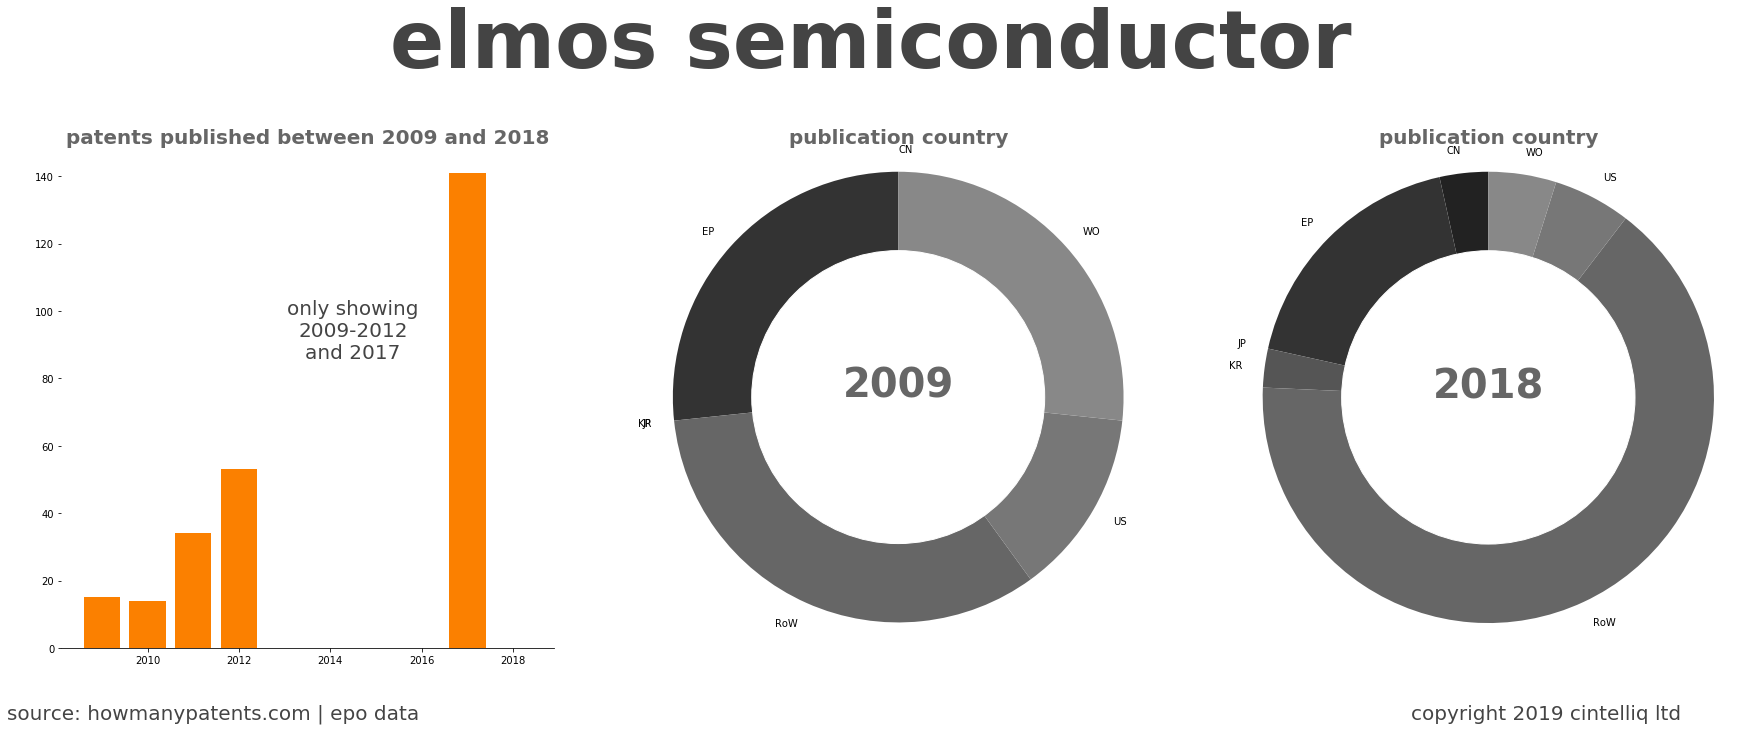 summary of patents for Elmos Semiconductor